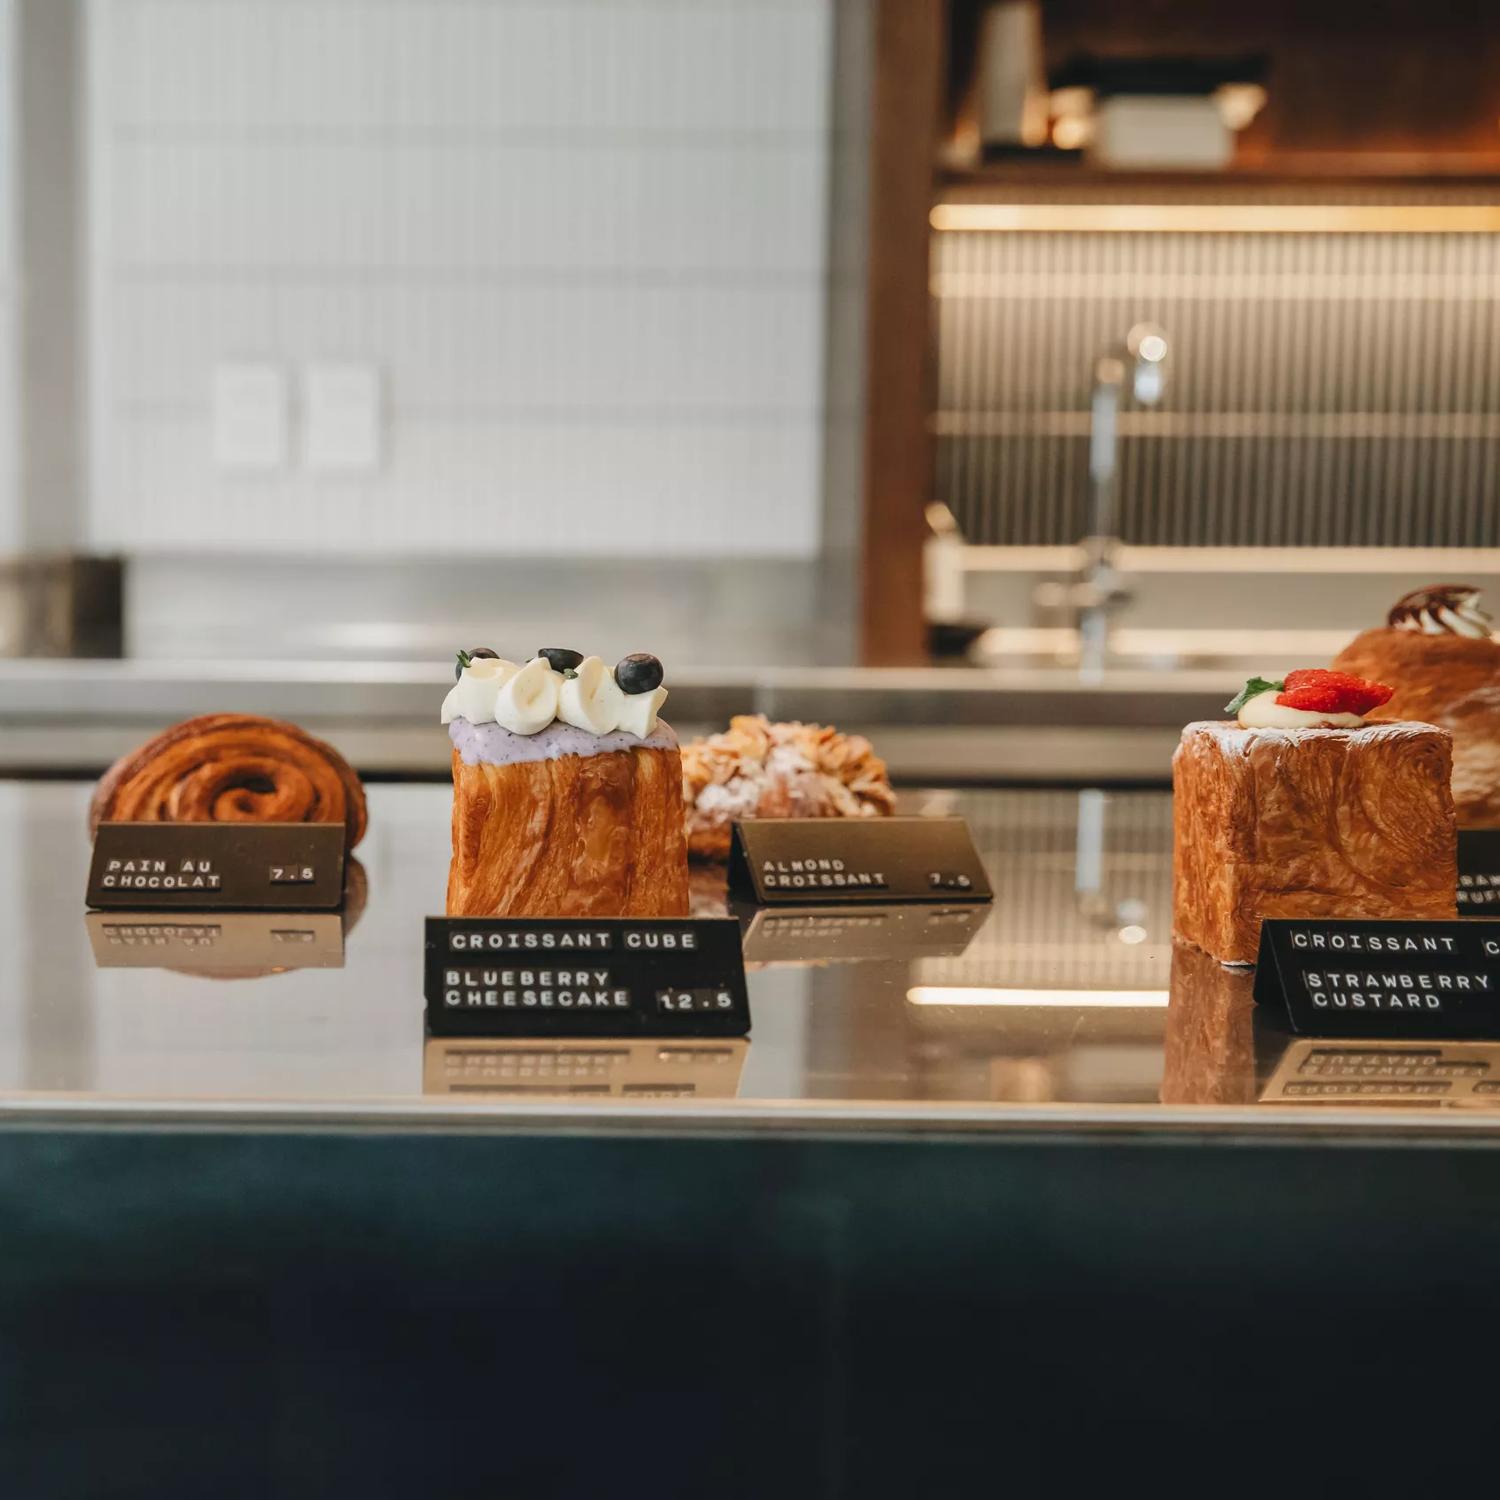 An assortment of pastries on the counter at Glou Glou, a café in Te Aro, Wellington. 